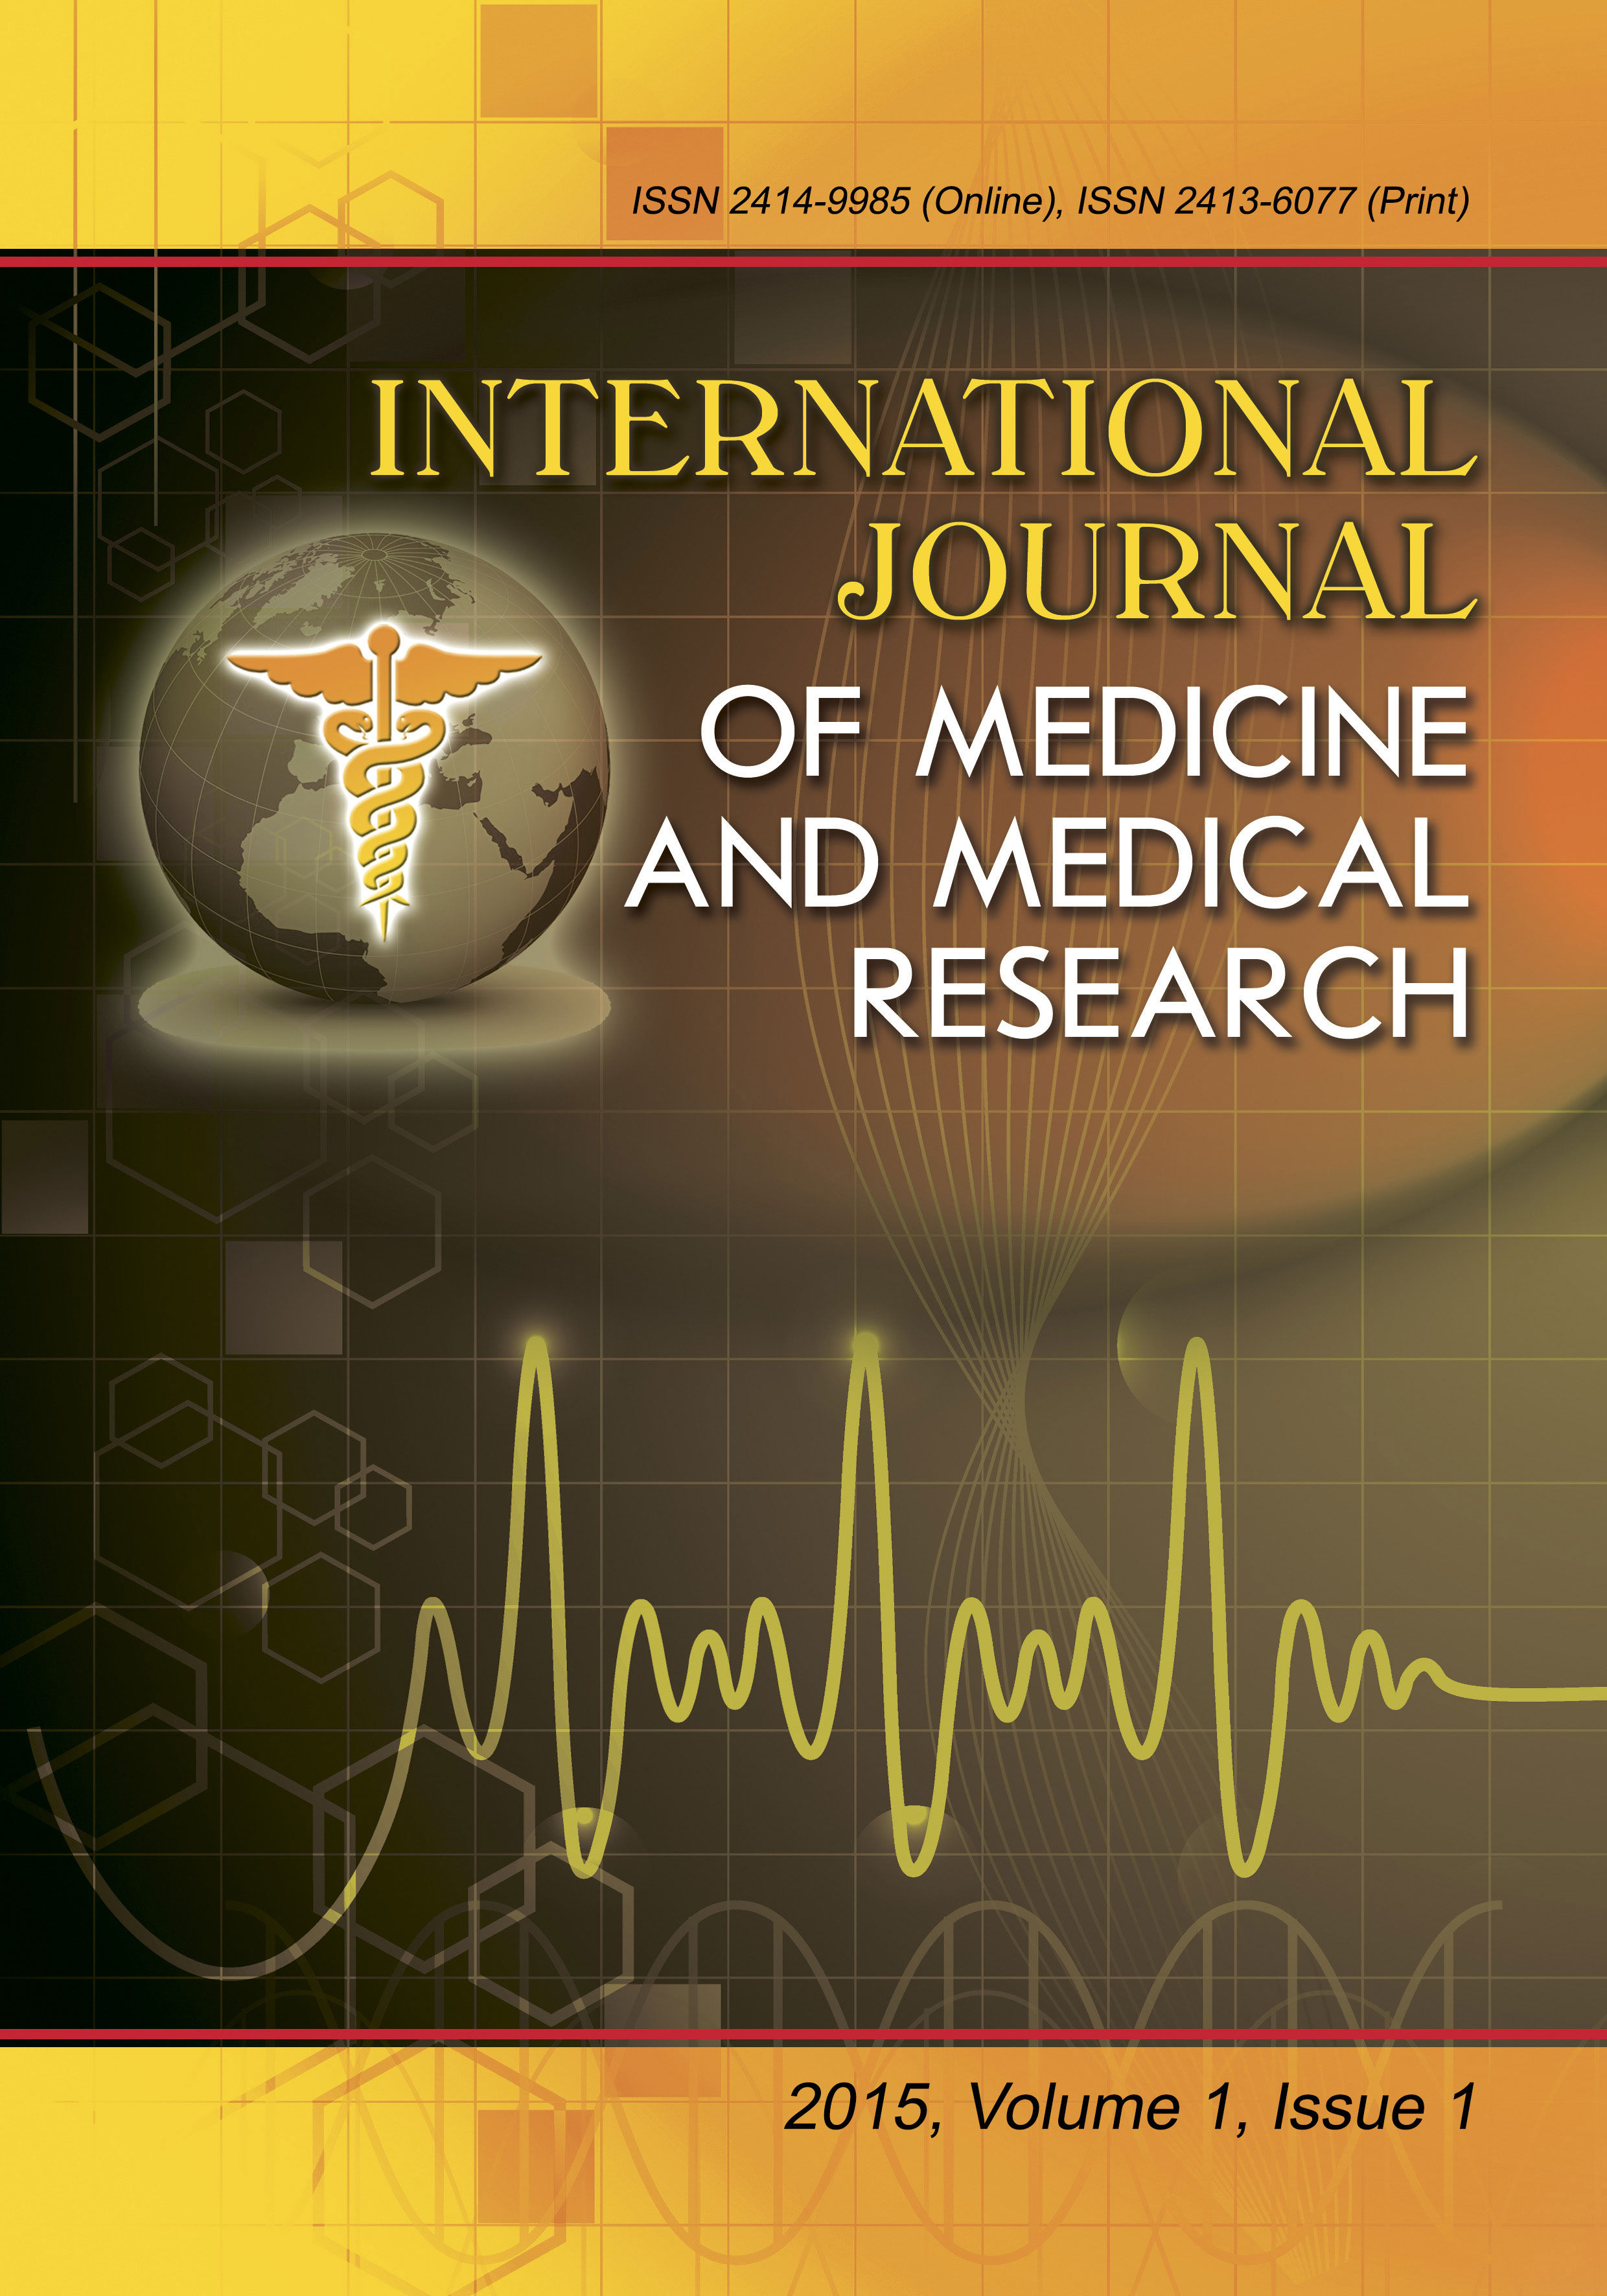 					View Vol. 1 No. 1 (2015): International Journal of Medicine and Medical Research
				